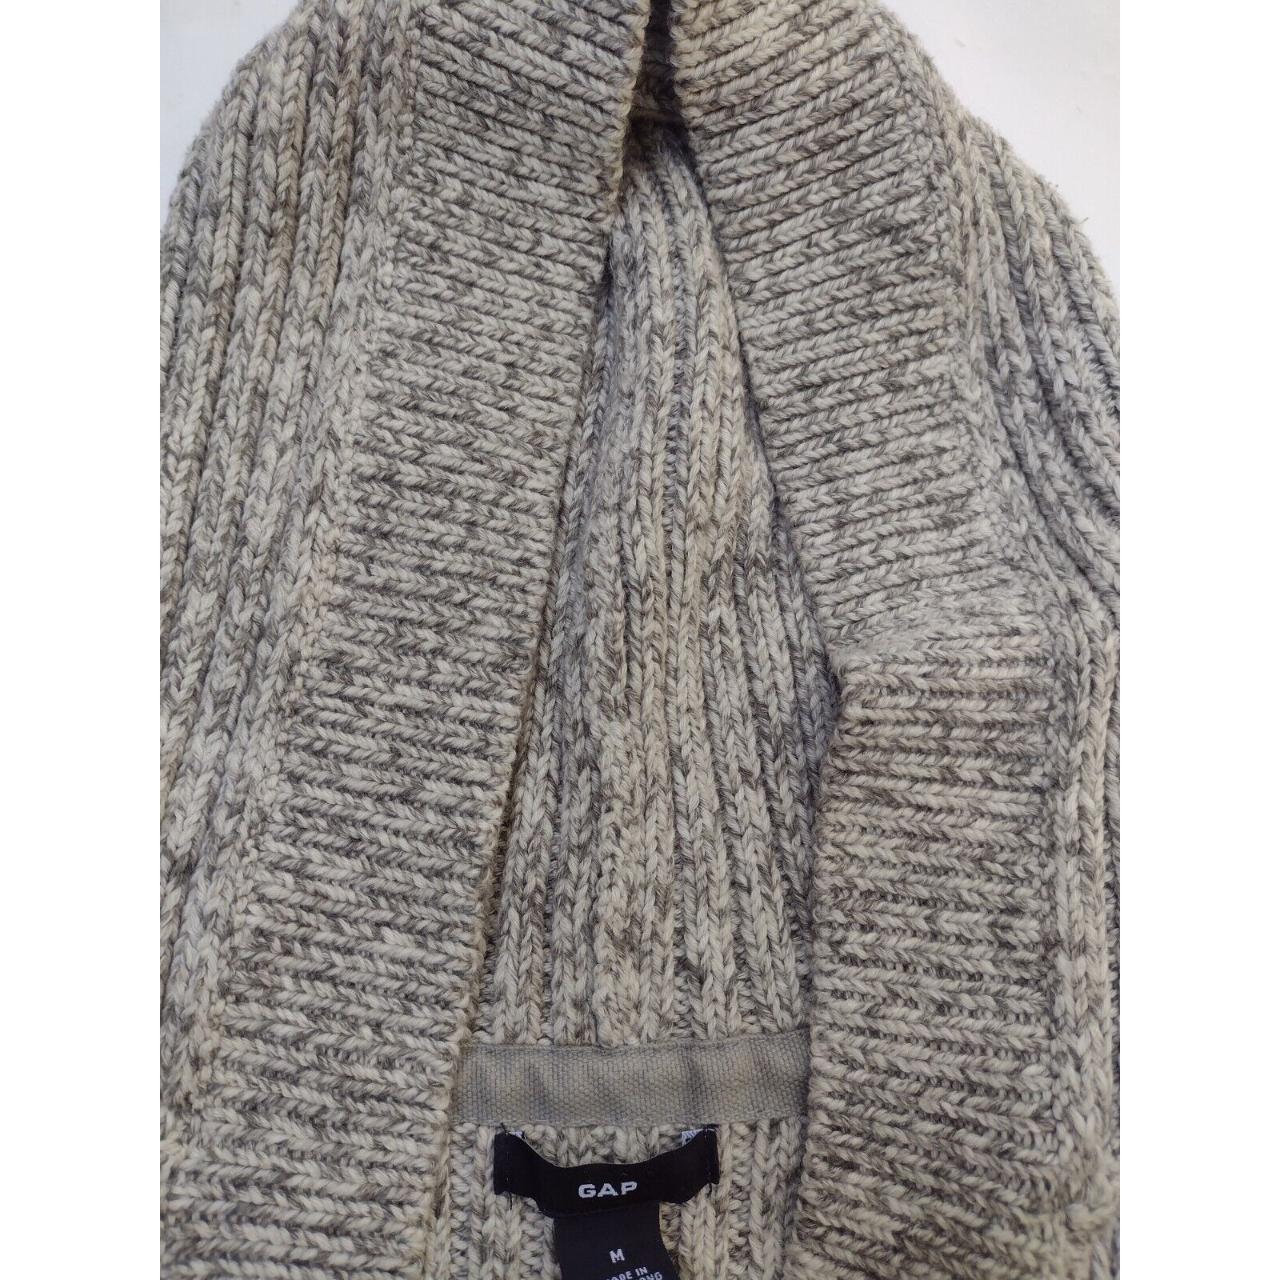 GAP Hooded Cable Knit Sweater Womens Sz M Long... - Depop